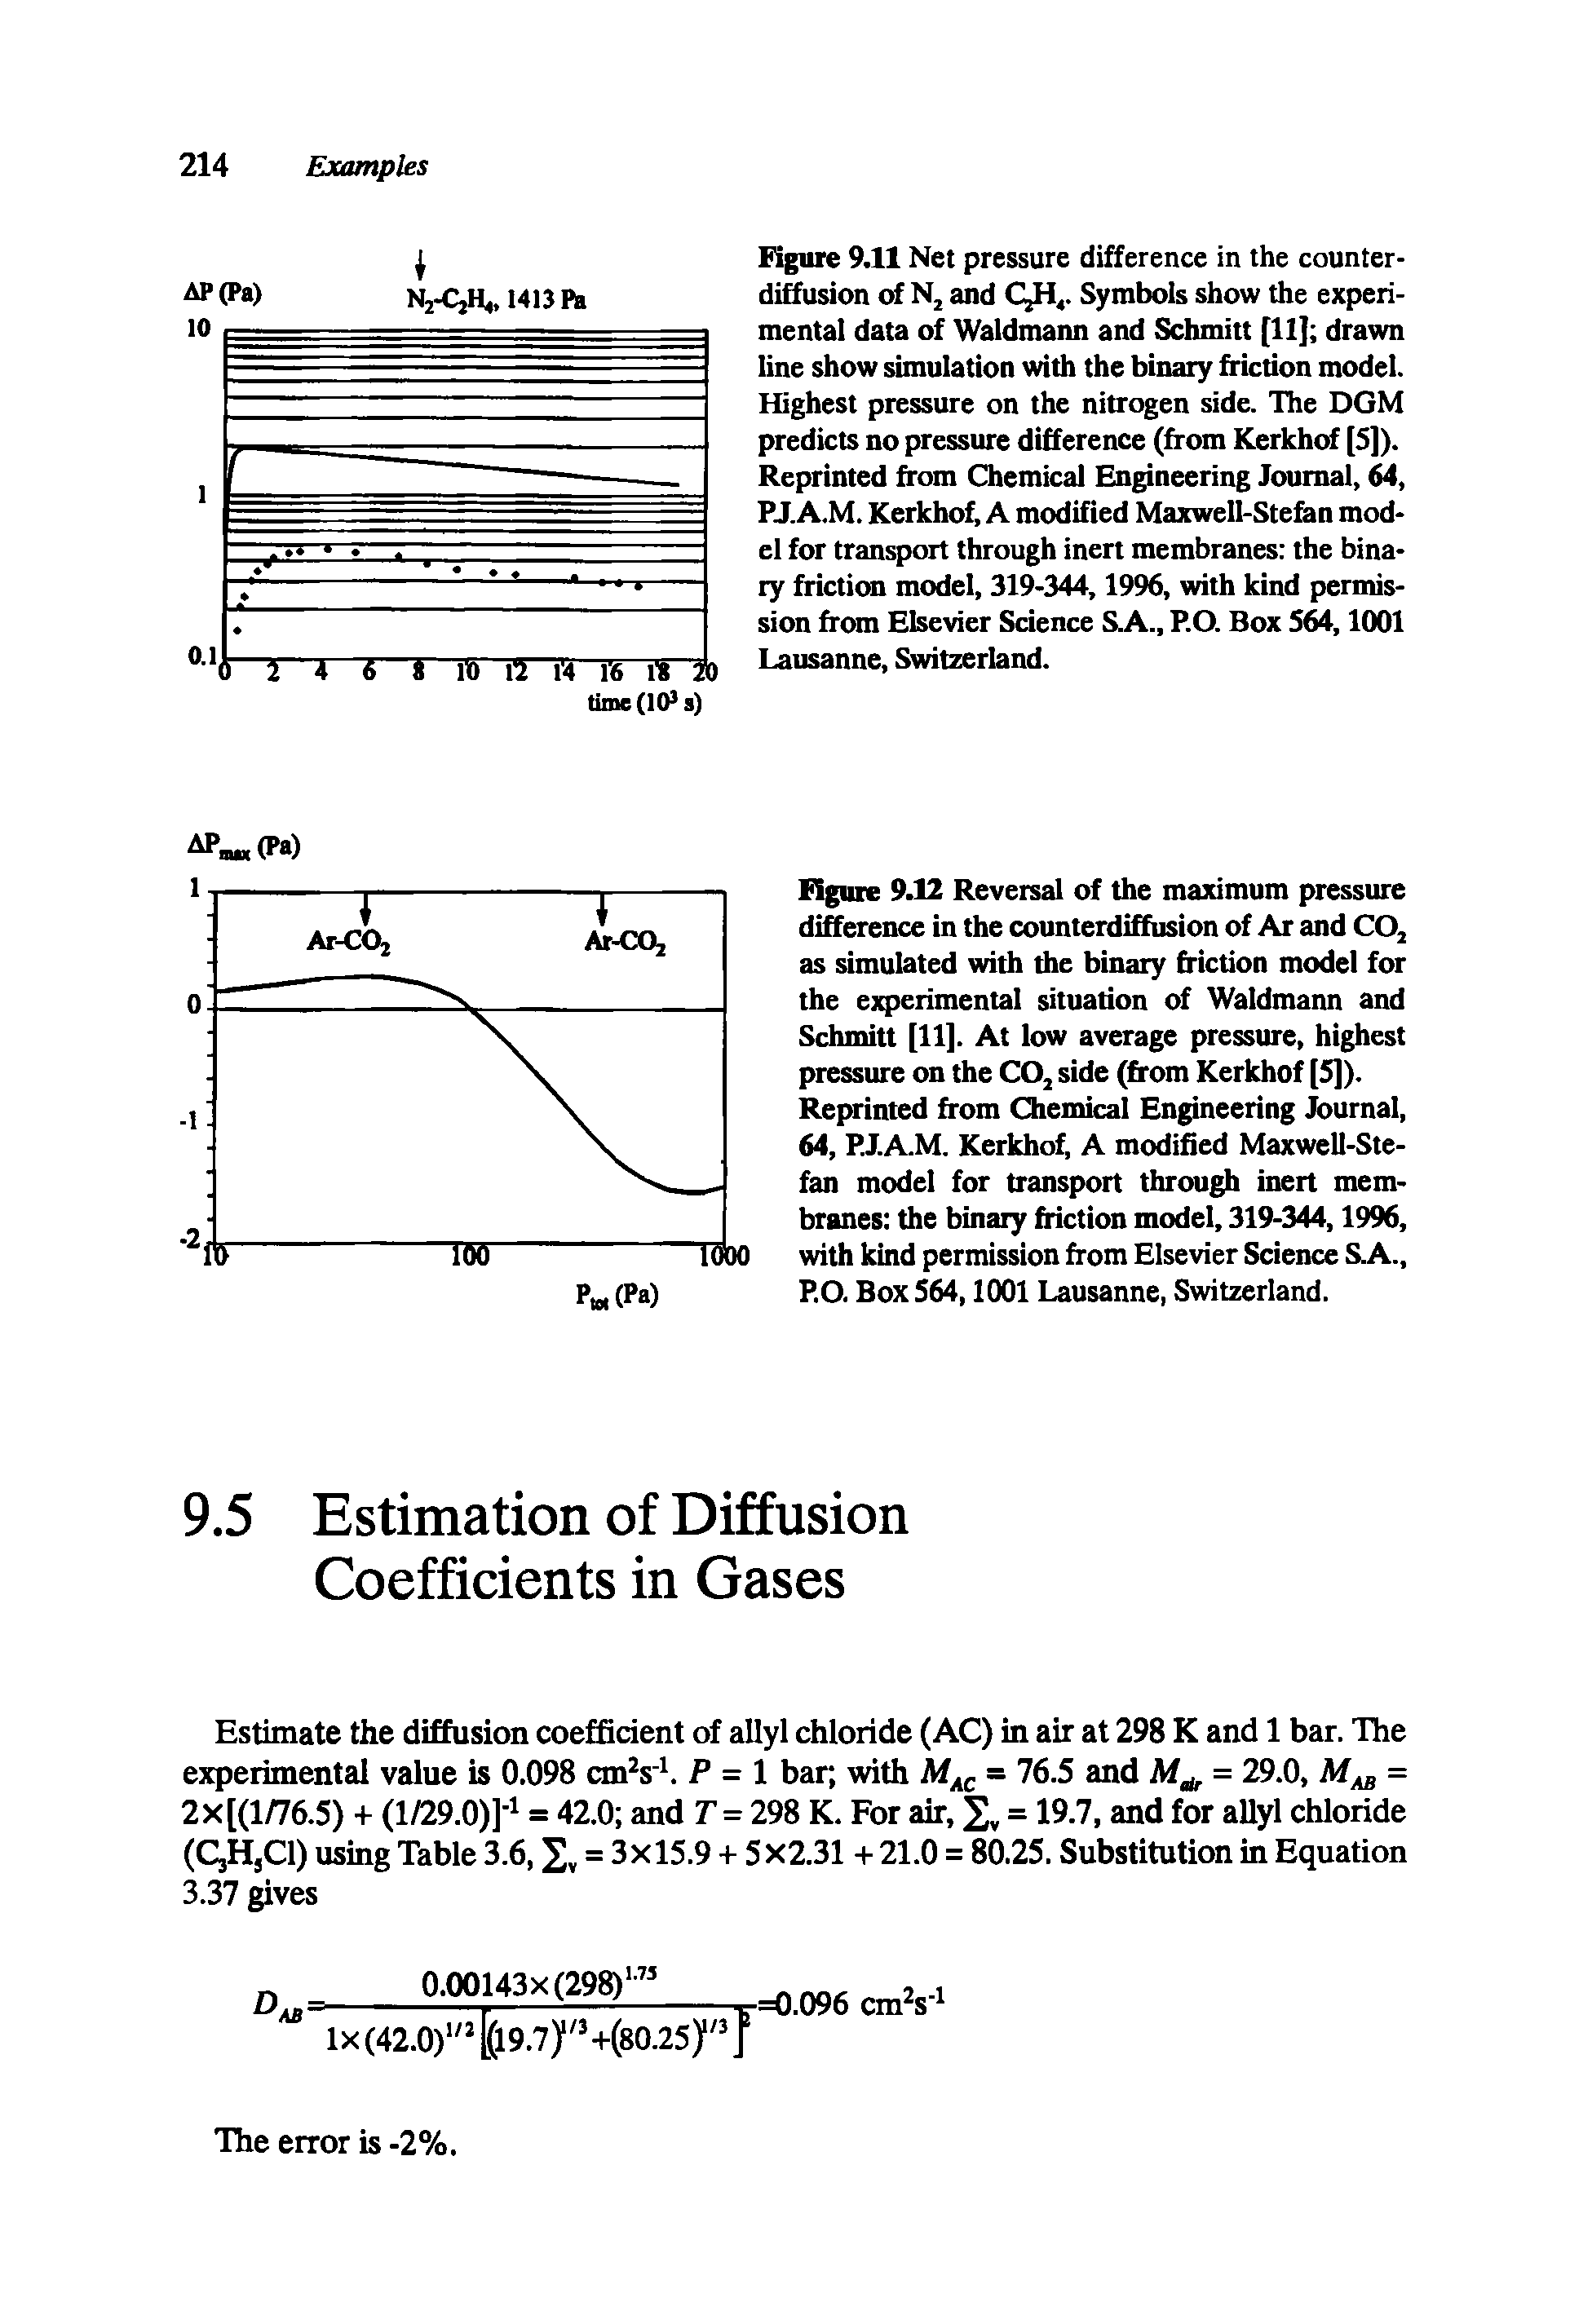 Figure 9.11 Net pressure difference in the counterdiffusion of N2 and CjH4. Symbols show the experimental data of Waldmann and Schmitt [11] drawn line show simulation with the binary friction model. Highest pressure on the nitrogen side. The DGM predicts no pressure difference (from Kerkhof [5]). Reprinted from Chemical Engineering Journal, 64, PJ.A.M. Kerkhof, A modified Maxwell-Stefan model for transport through inert membranes the binary friction model, 319-344,1996, with kind permission from Elsevier Science S.A., RO. Box 564,1001 Lausanne, Switzerland.